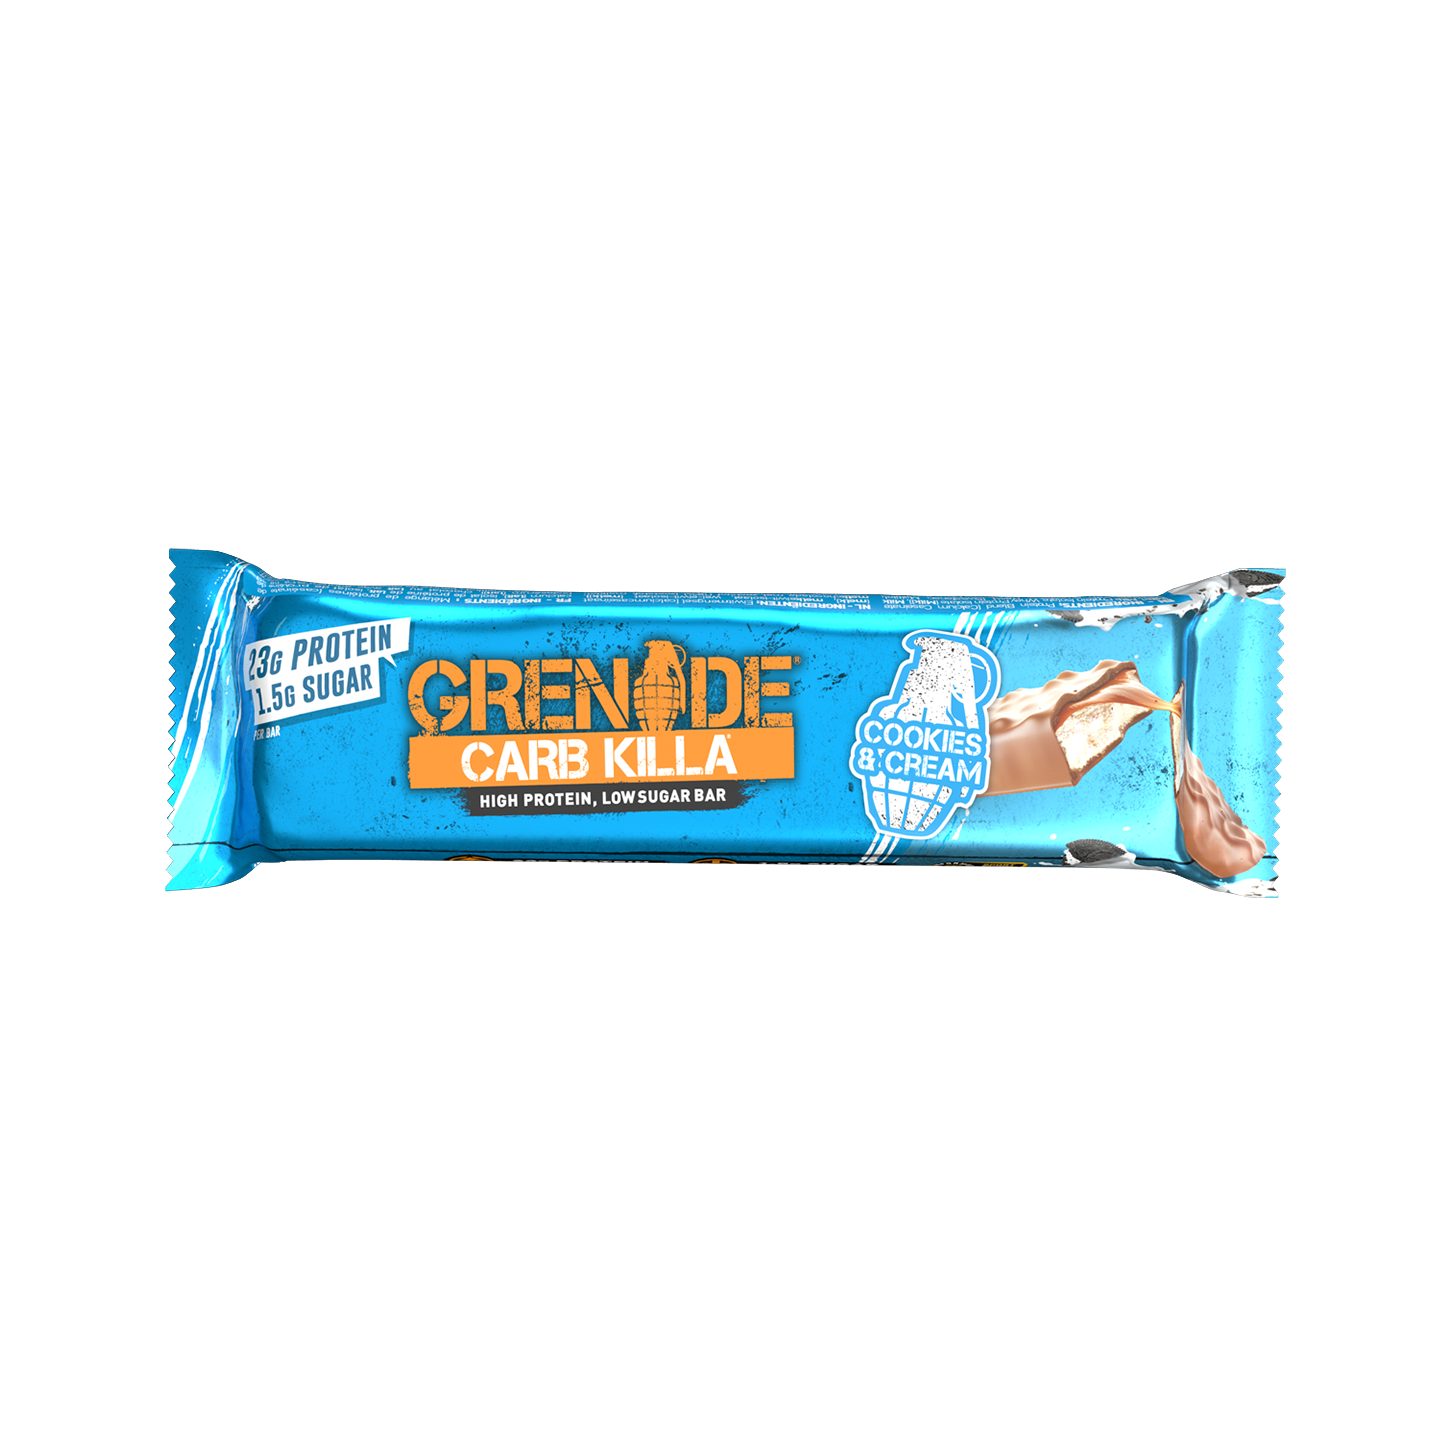 Grenade Carb Killa Keto Protein Bars (1 bar) Protein Snacks Cookies and Cream,Chocolate Chip Cookie Dough Grenade